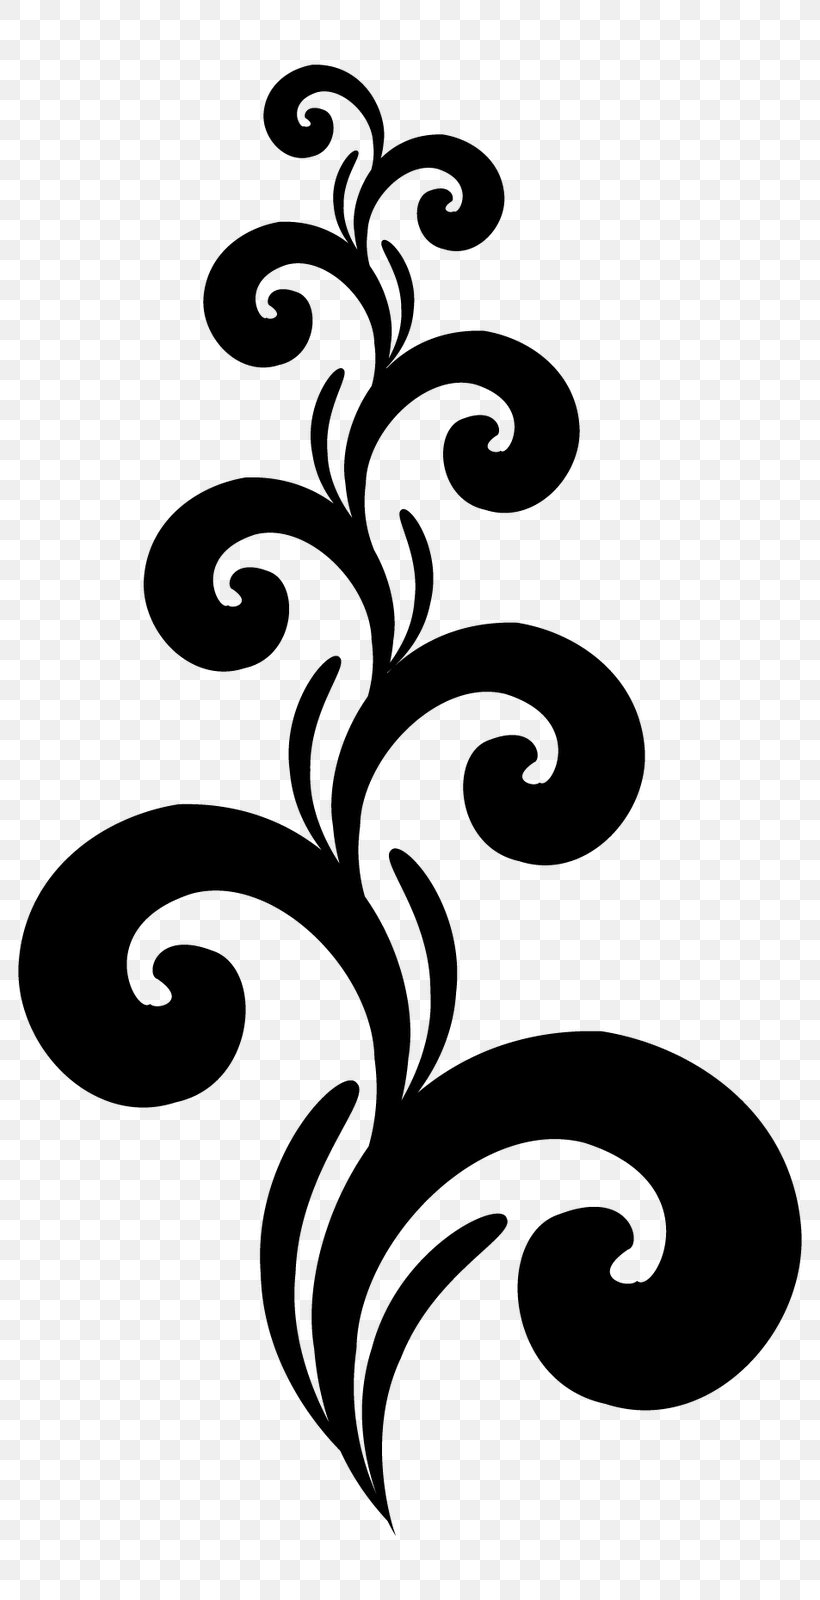 Flower Floral Design Visual Design Elements And Principles, PNG, 784x1600px, Flower, Black And White, Calligraphy, Curve, Floral Design Download Free